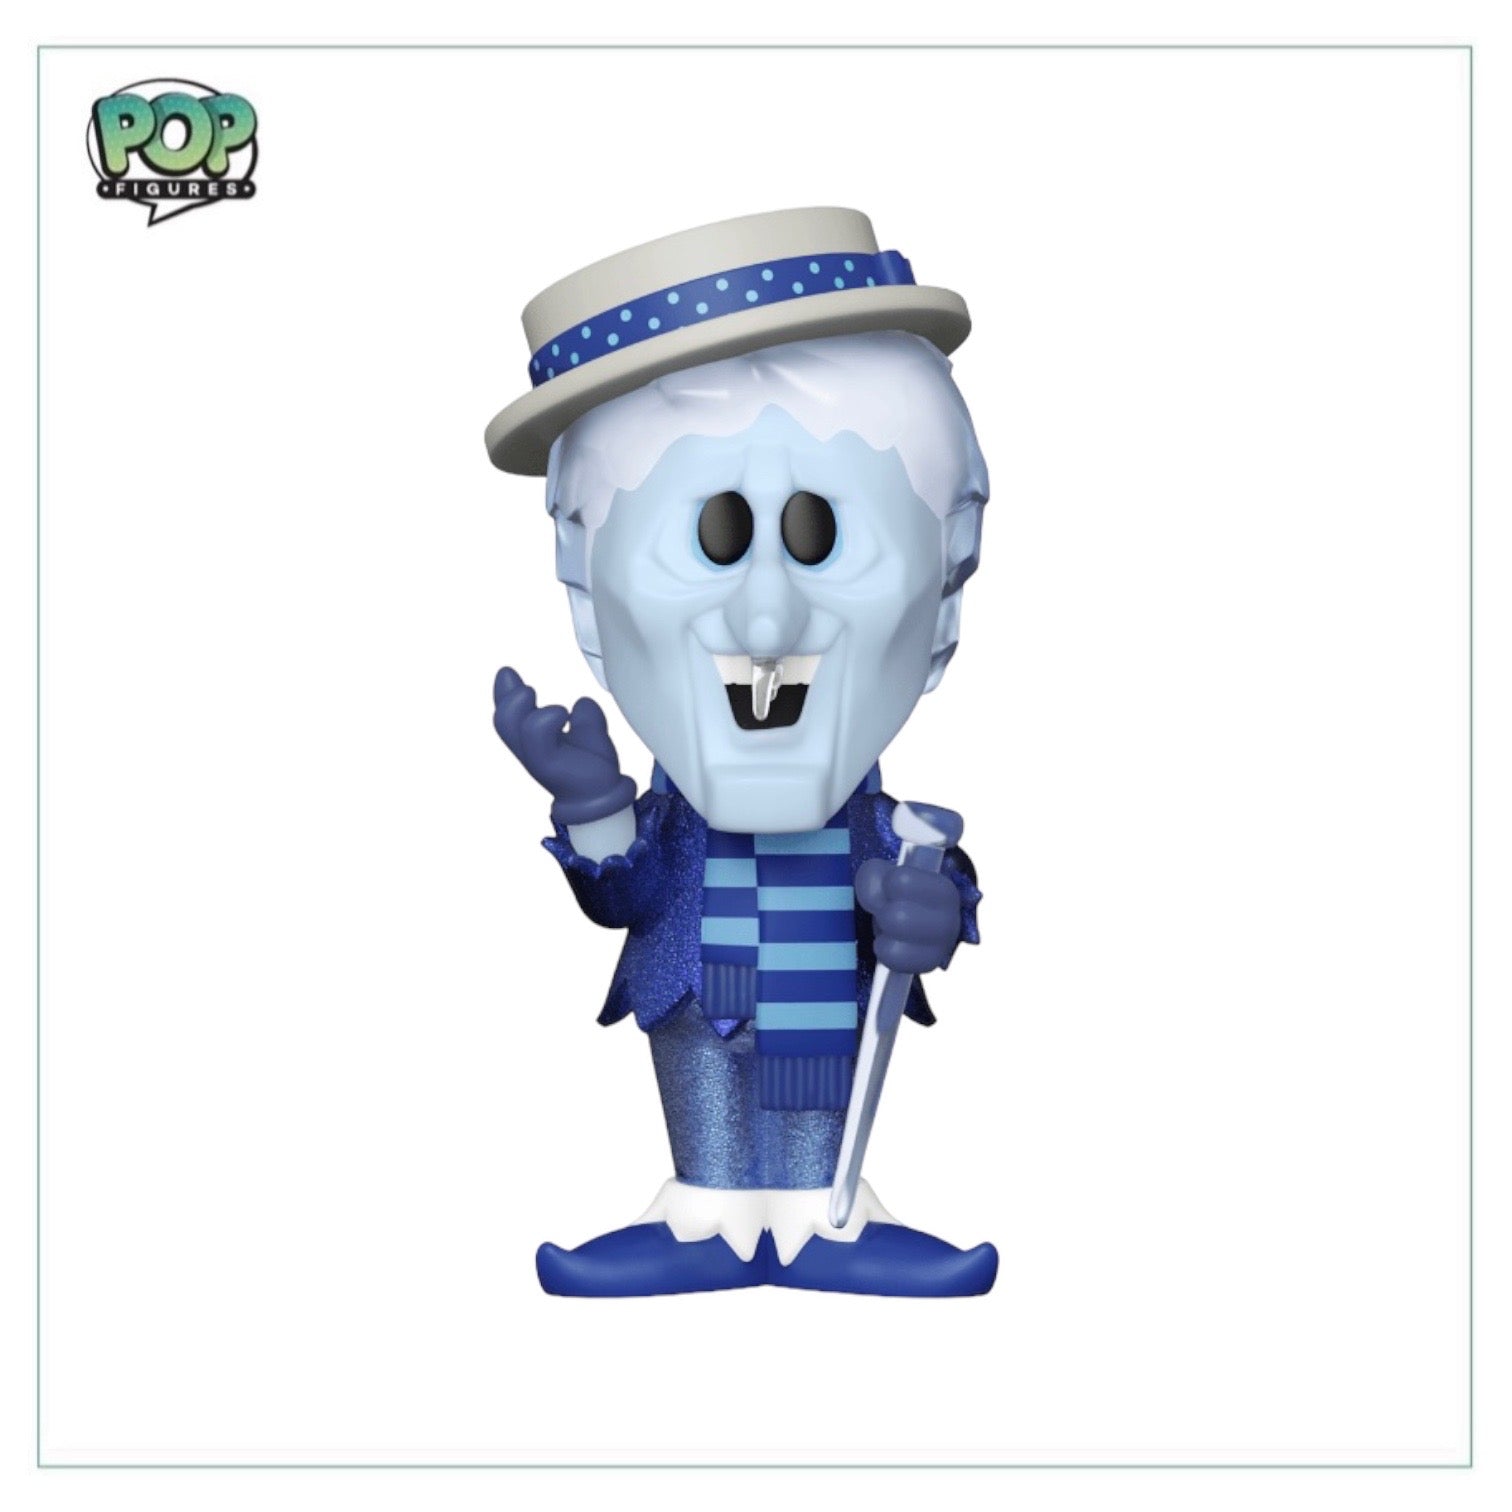 Snow Miser Funko Soda Vinyl Figure! - The Year Without a Santa Claus - International LE7500 Pcs - Chance of Chase